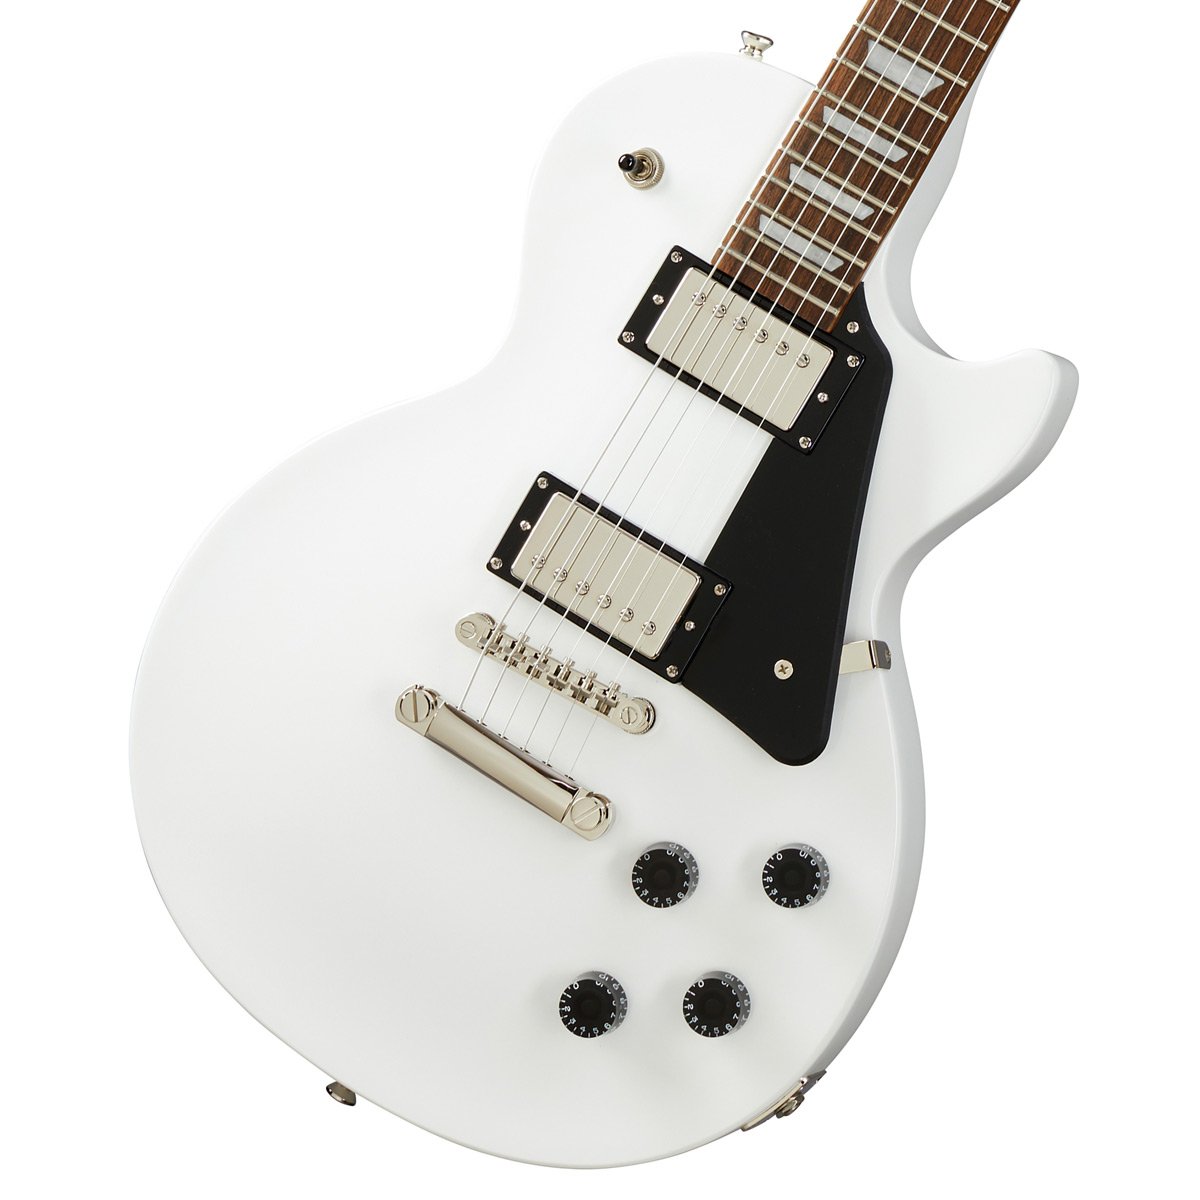 Epiphone / inspired by Gibson Les Paul Studio Alpine White 